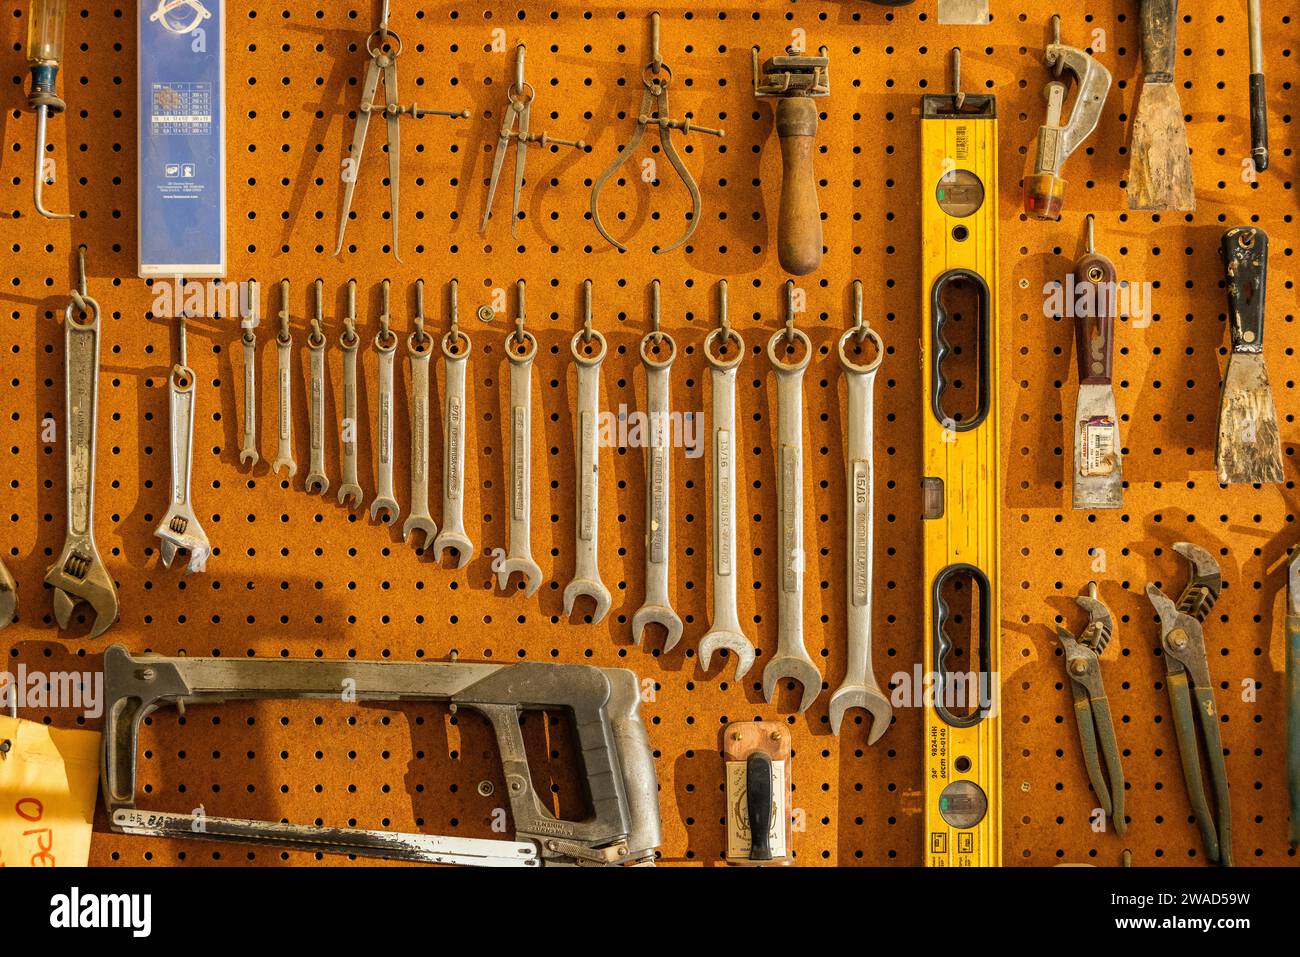 Tools on pegboard hooks on wall of wood and metal shop Stock Photo